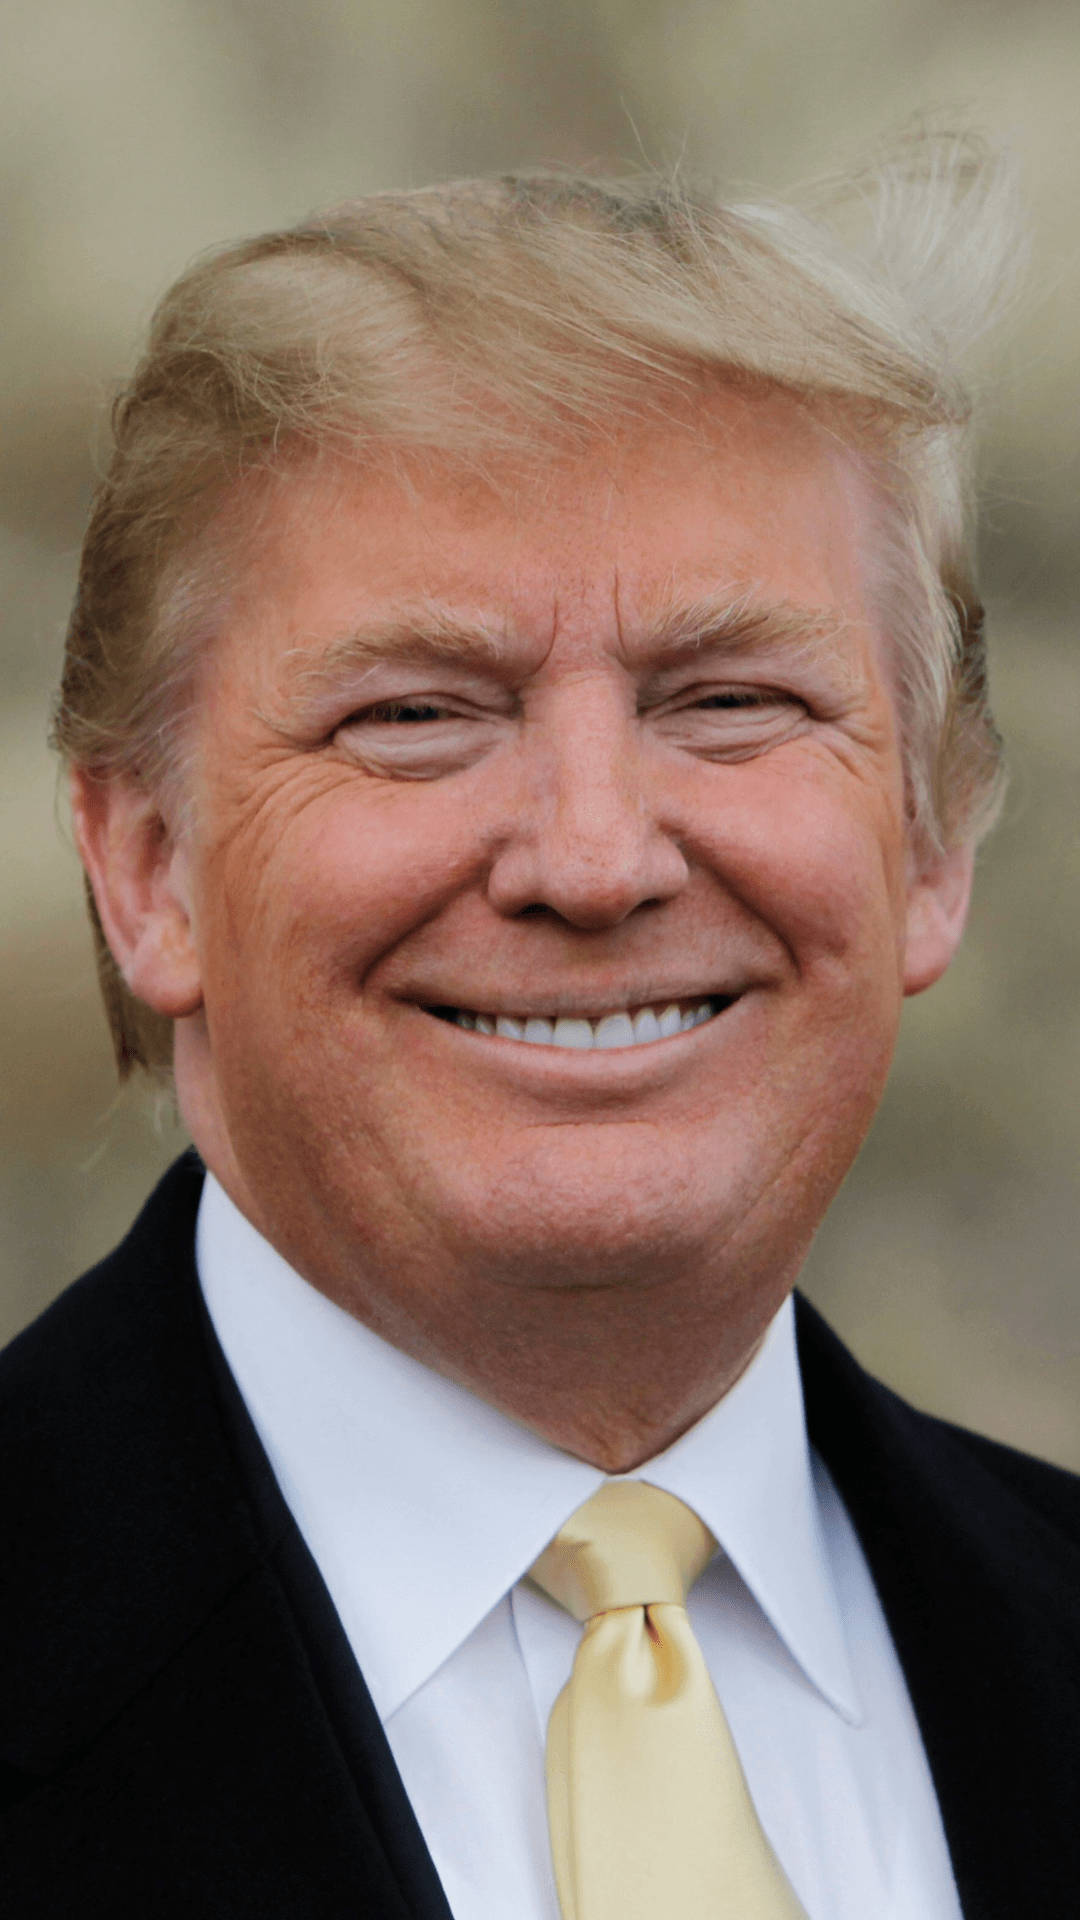 Donald Trump With Toothy Grin Wallpaper